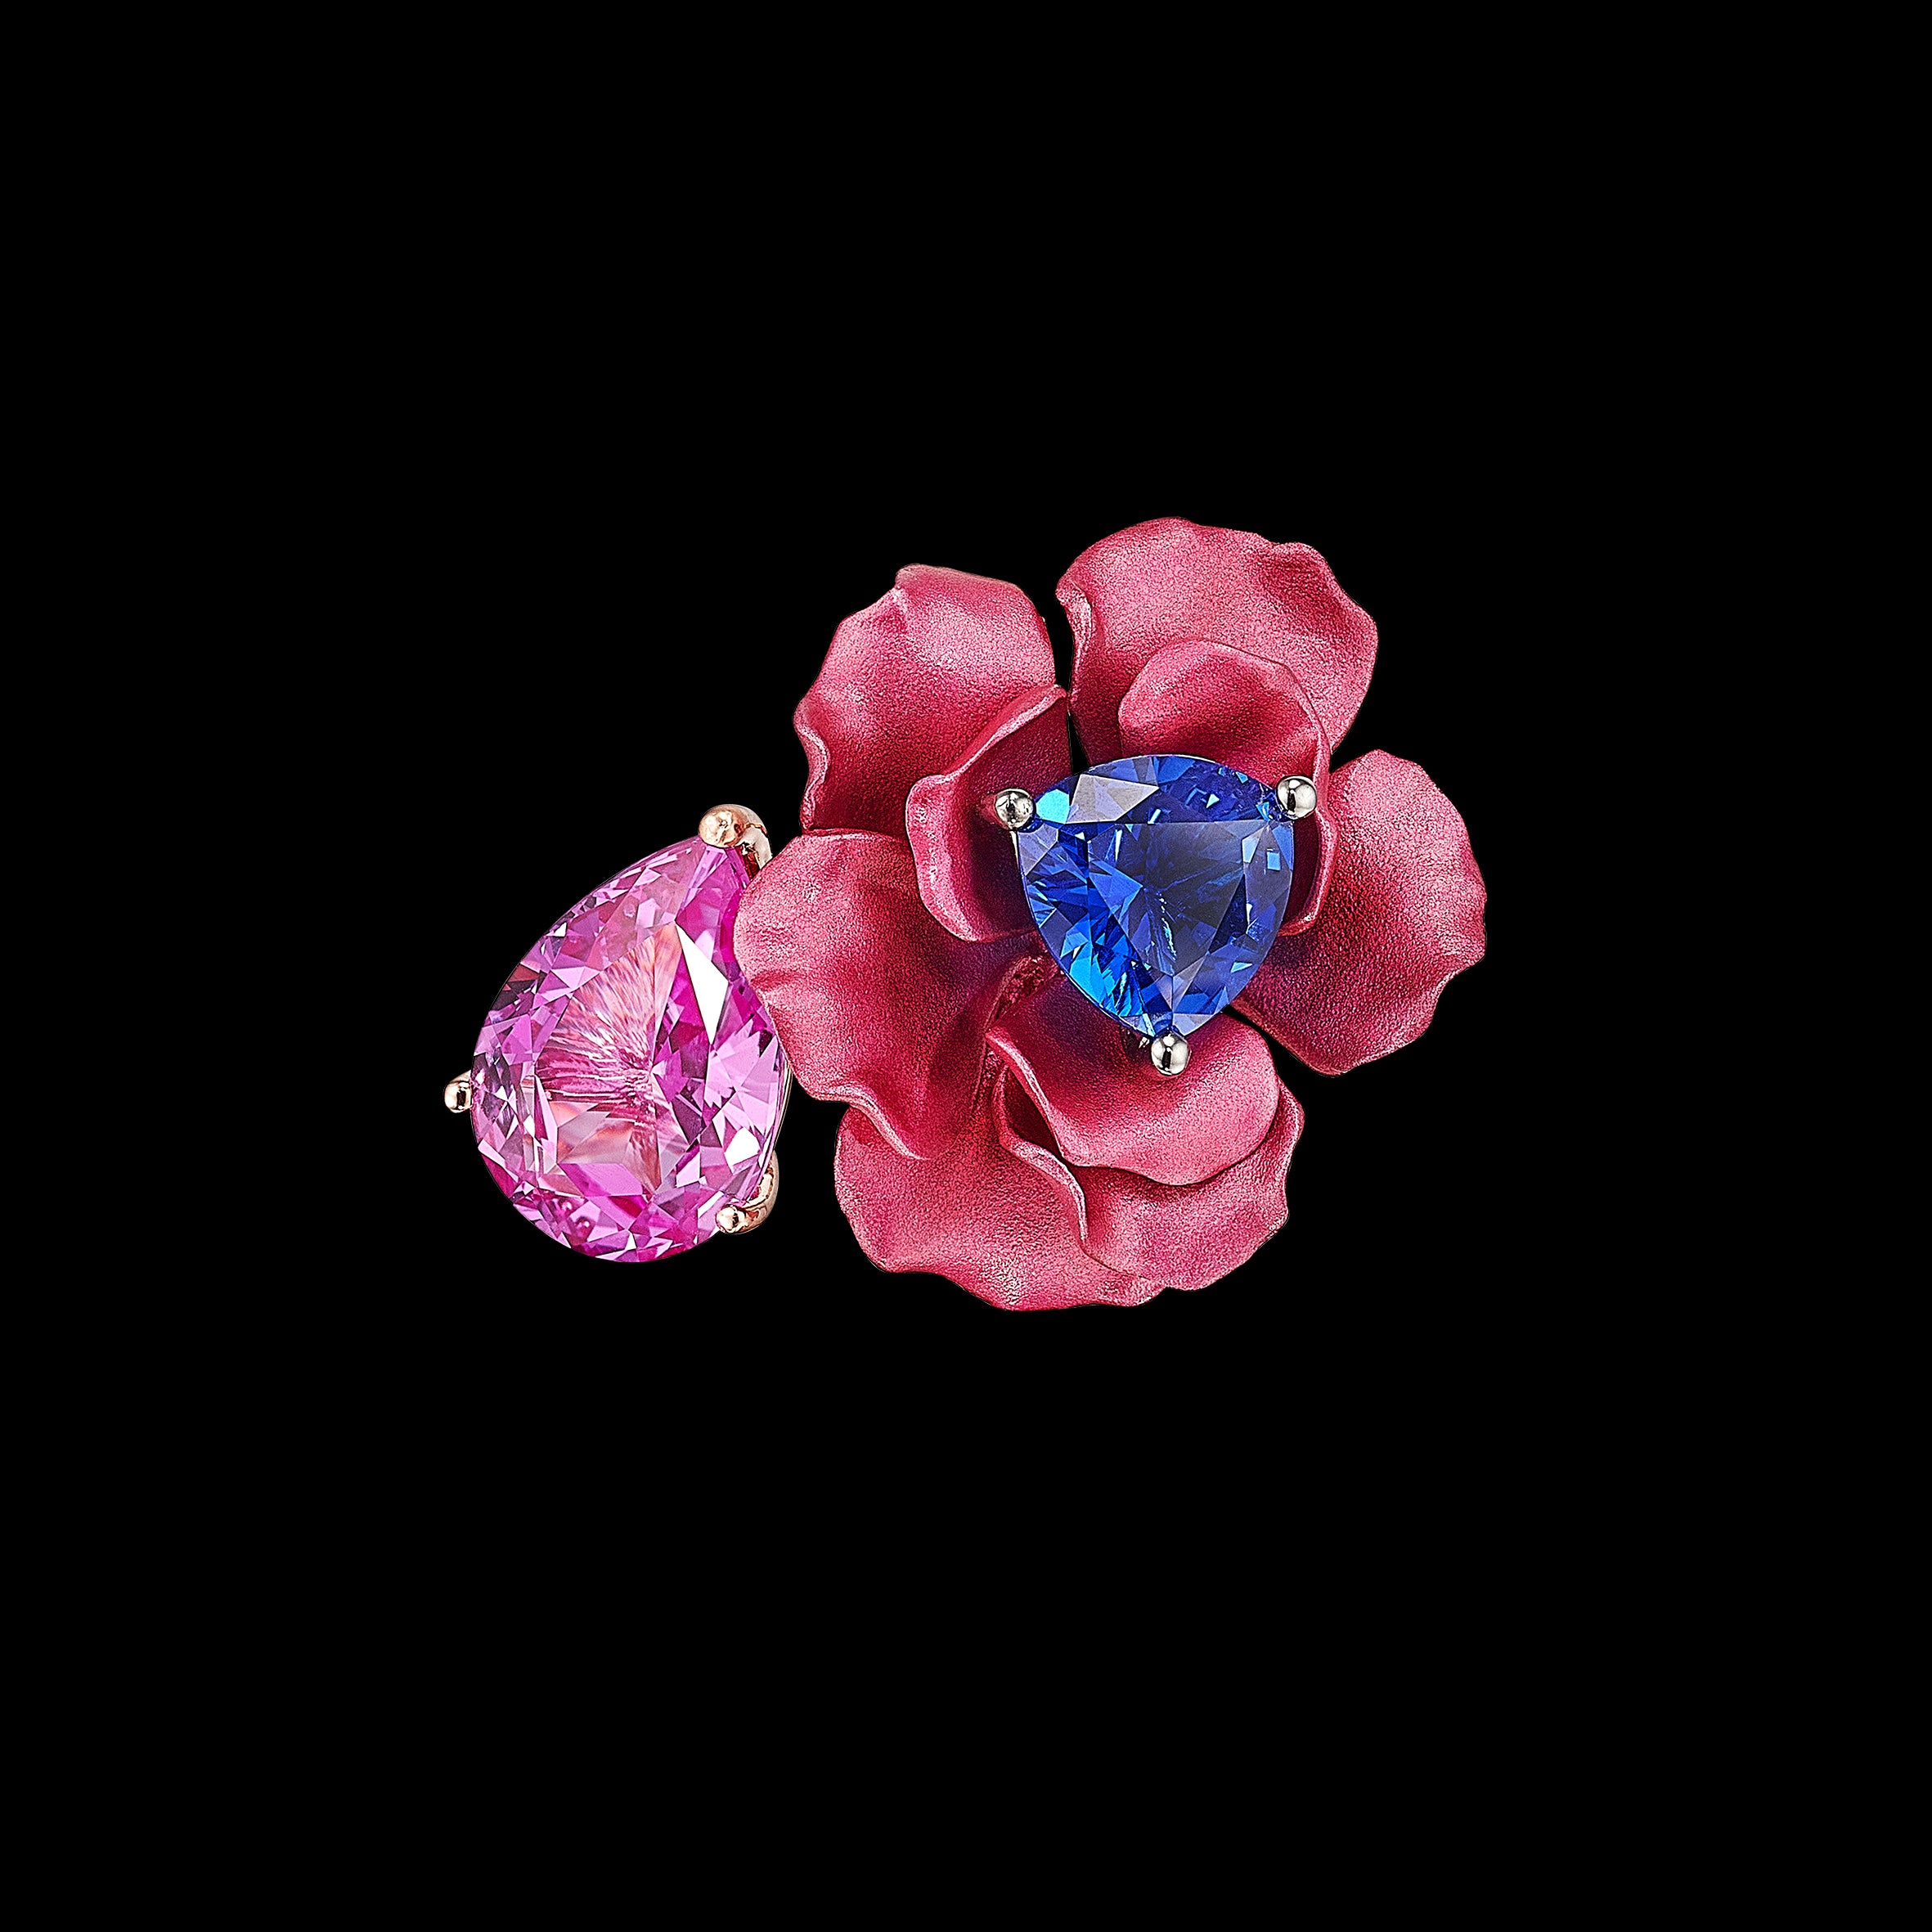 Sapphire Blossom Ring – Anabela Chan Joaillerie